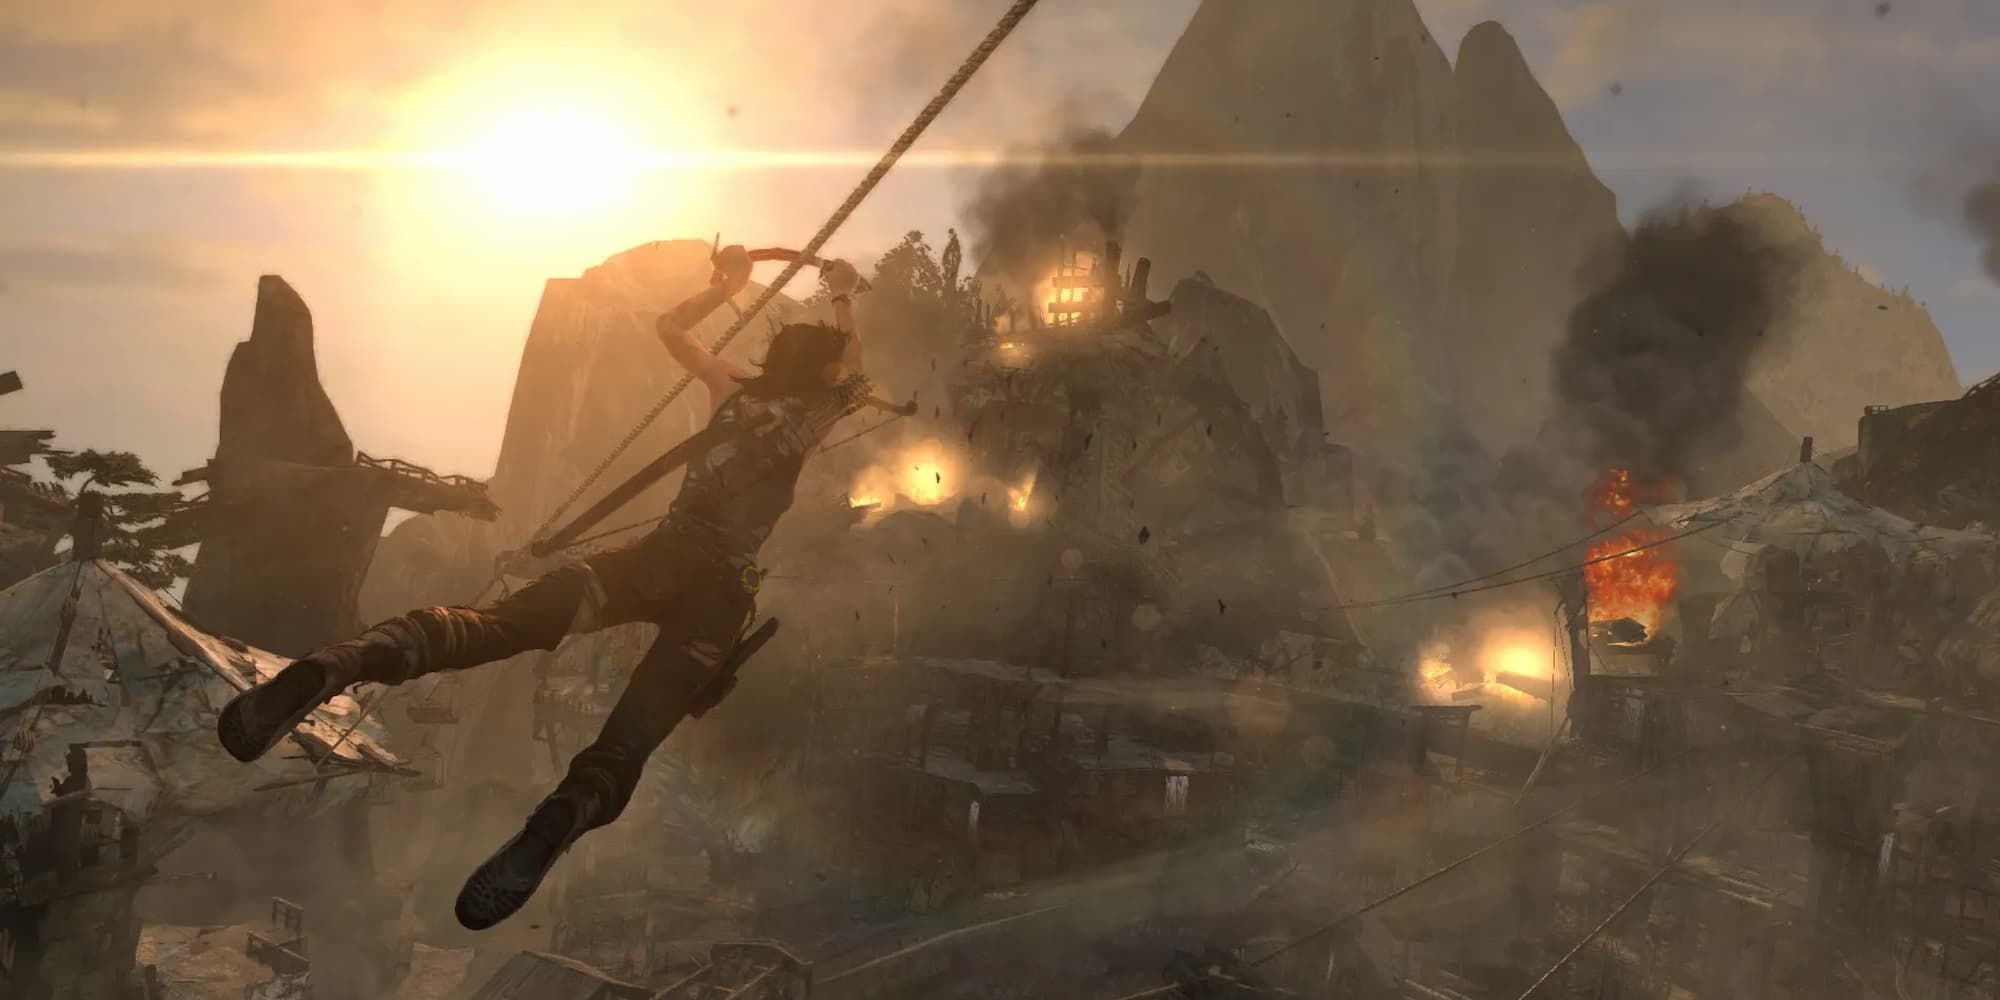 Lara Croft of Tomb Raider uses a small pickaxe to zipline across a rope towards a burning village.